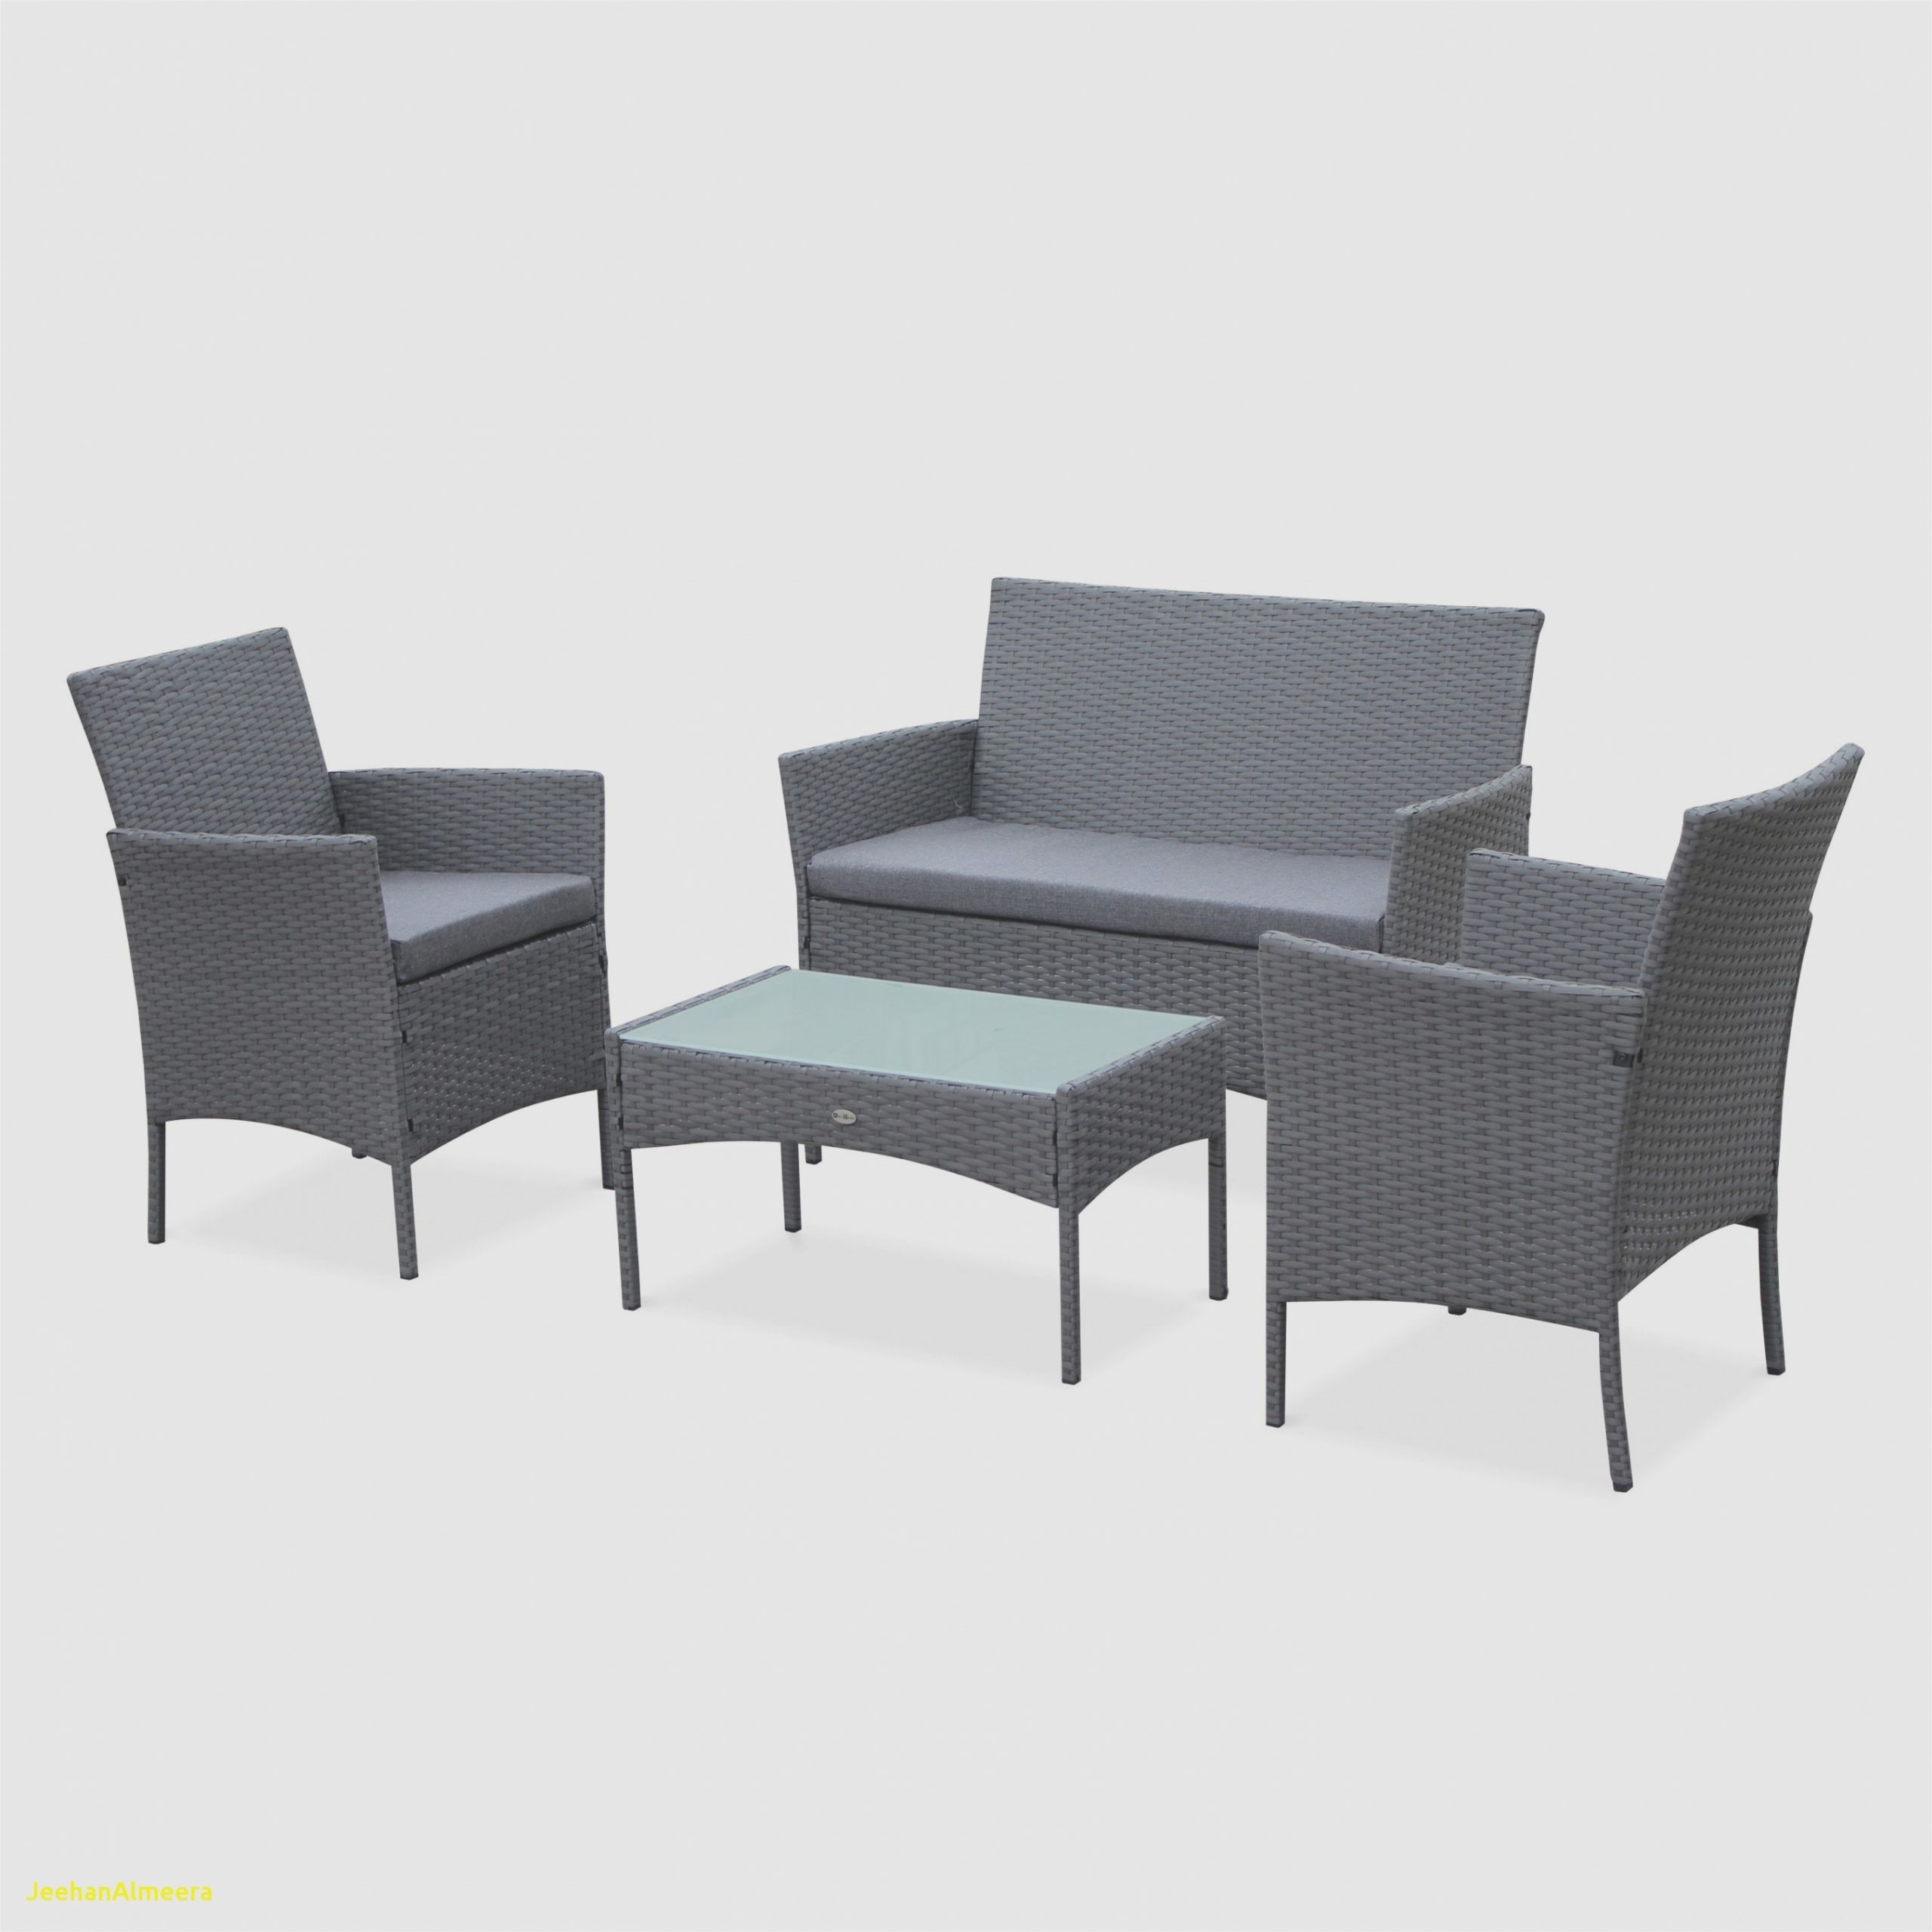 chaise pour table ronde charmant table chaise de jardin table de jardin avec rallonge table de chaise pour table ronde scaled